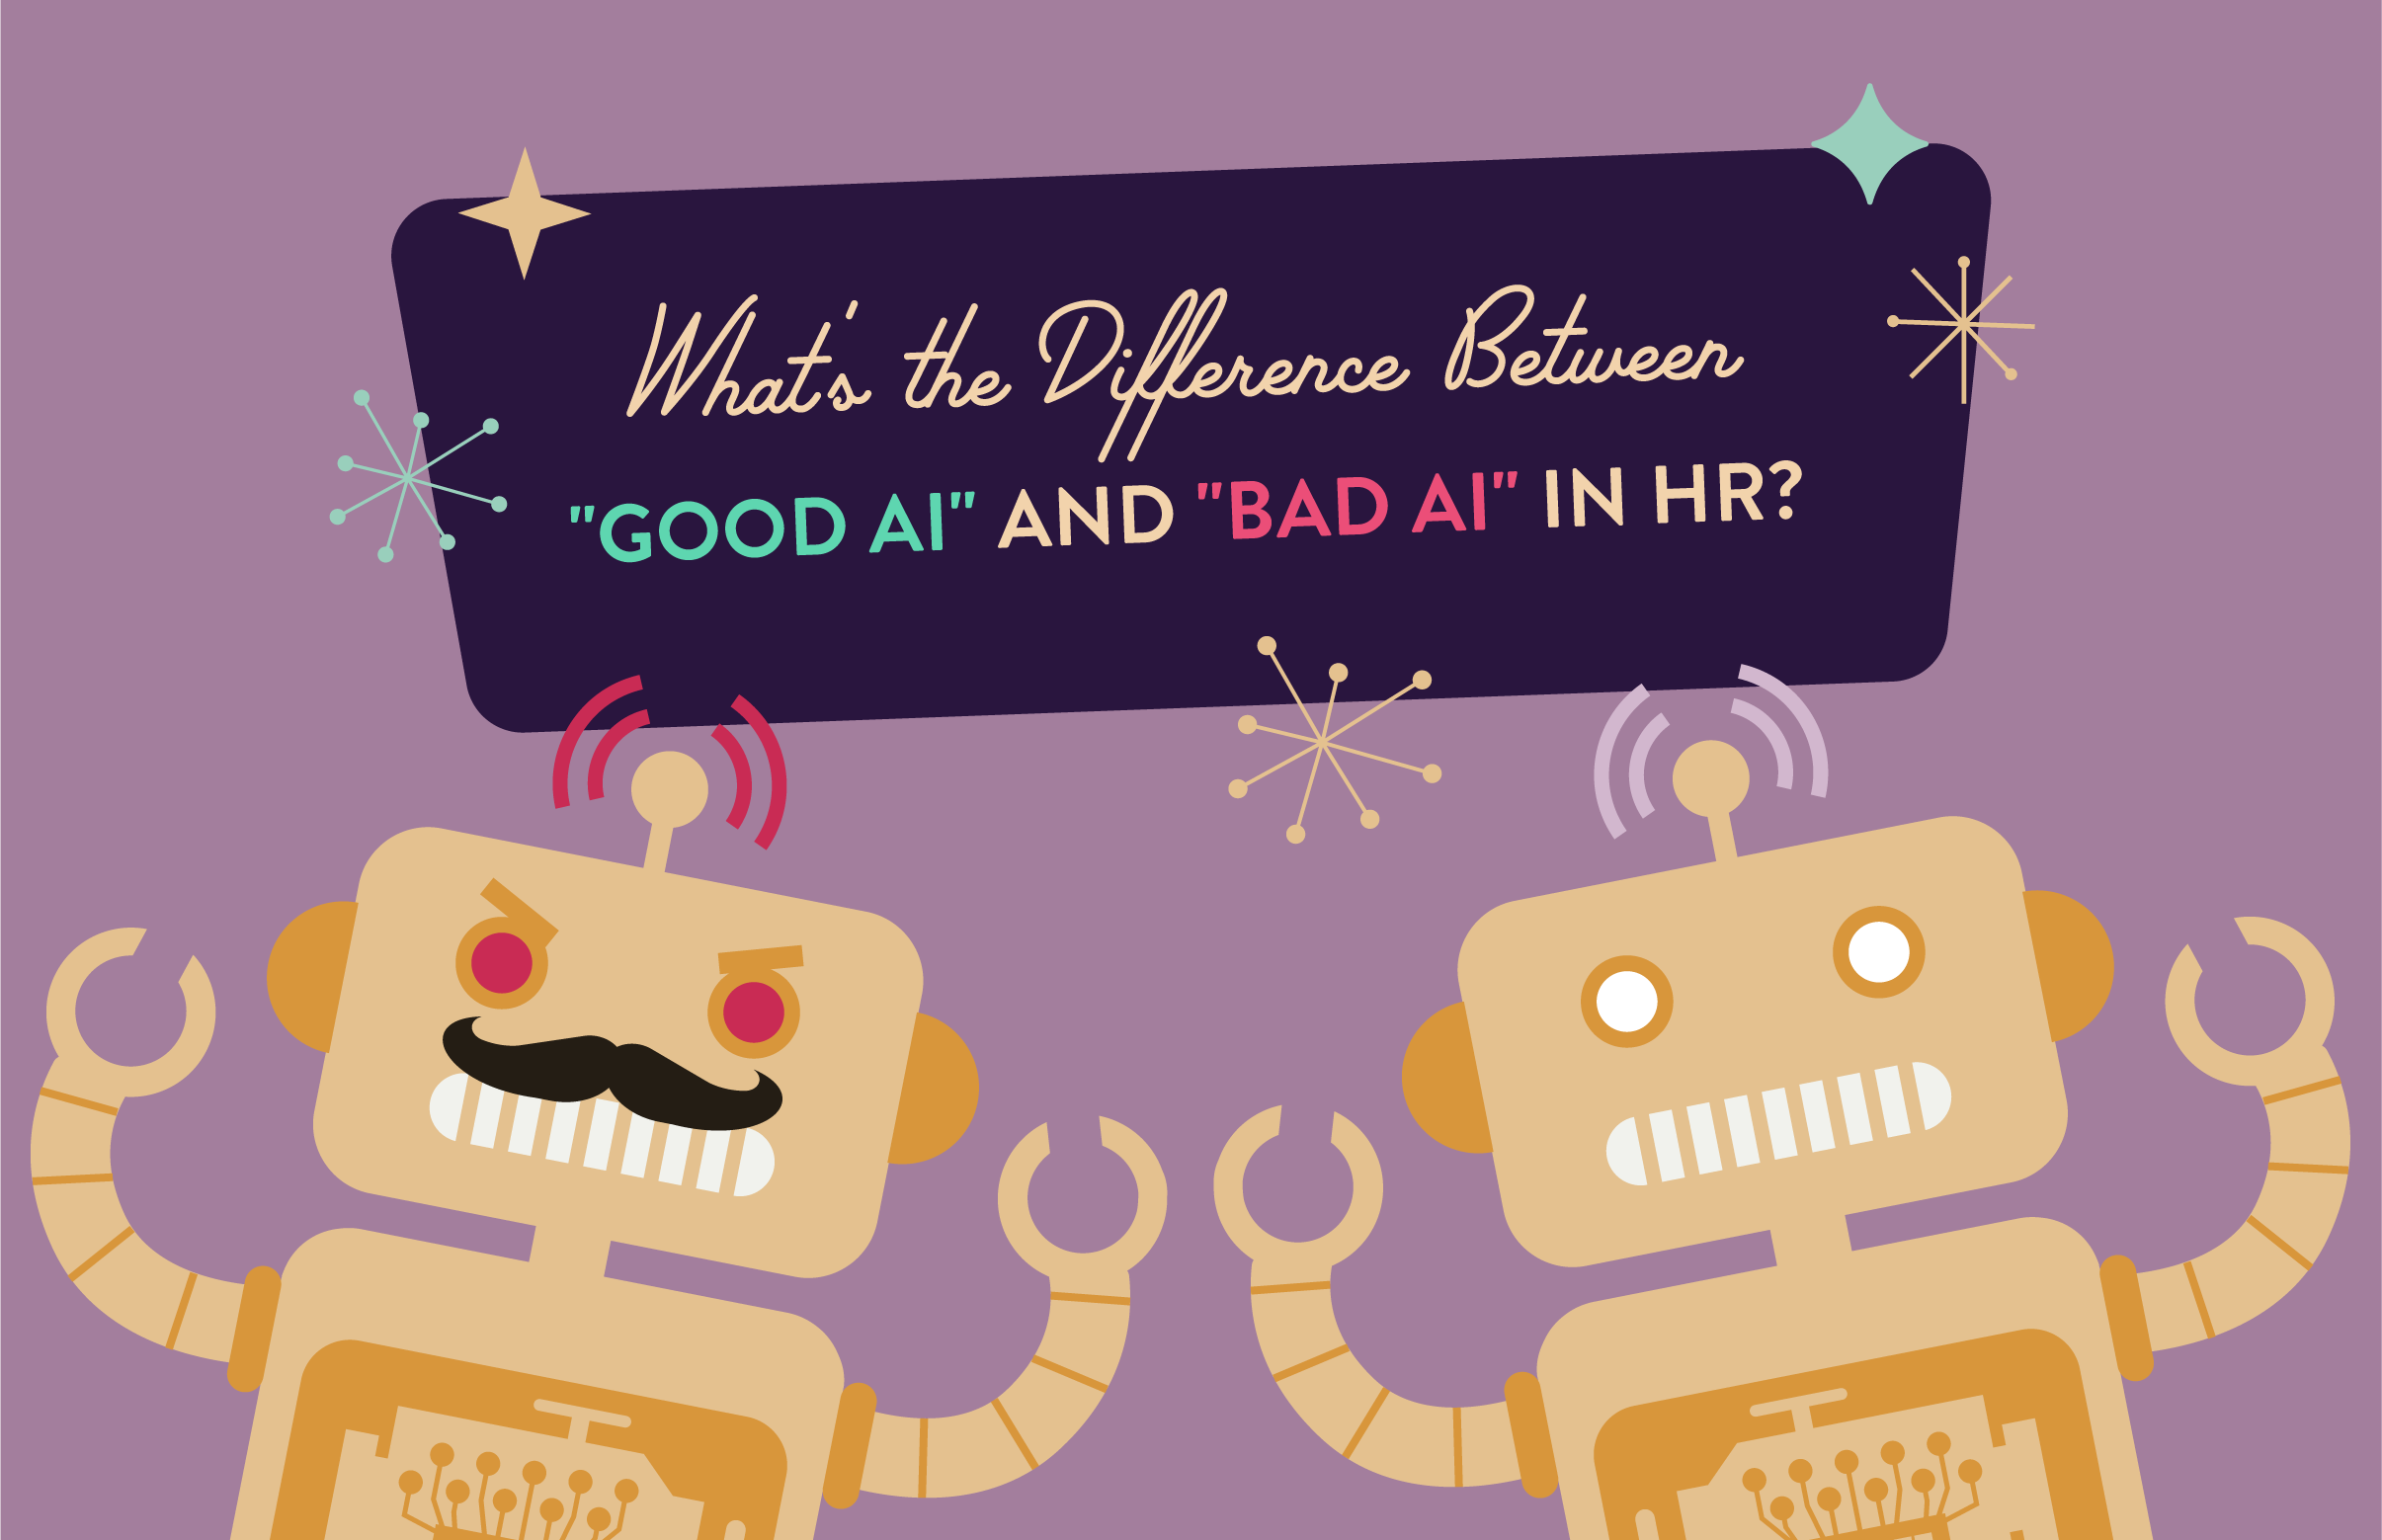 What's the Difference Between "Good AI" and "Bad AI" in HR?